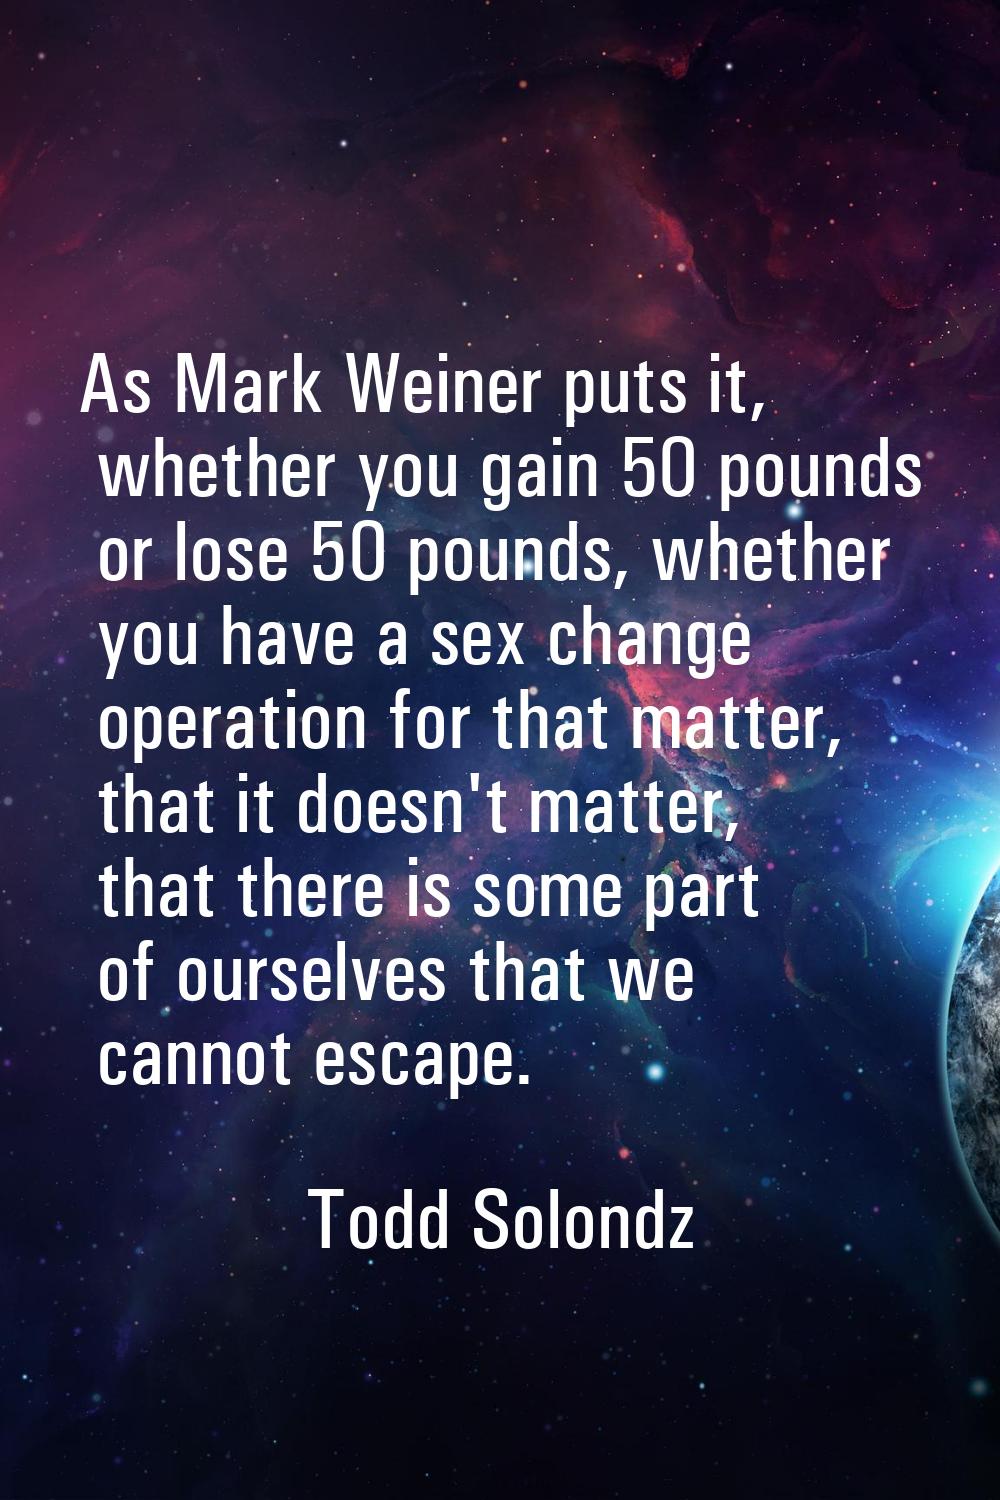 As Mark Weiner puts it, whether you gain 50 pounds or lose 50 pounds, whether you have a sex change